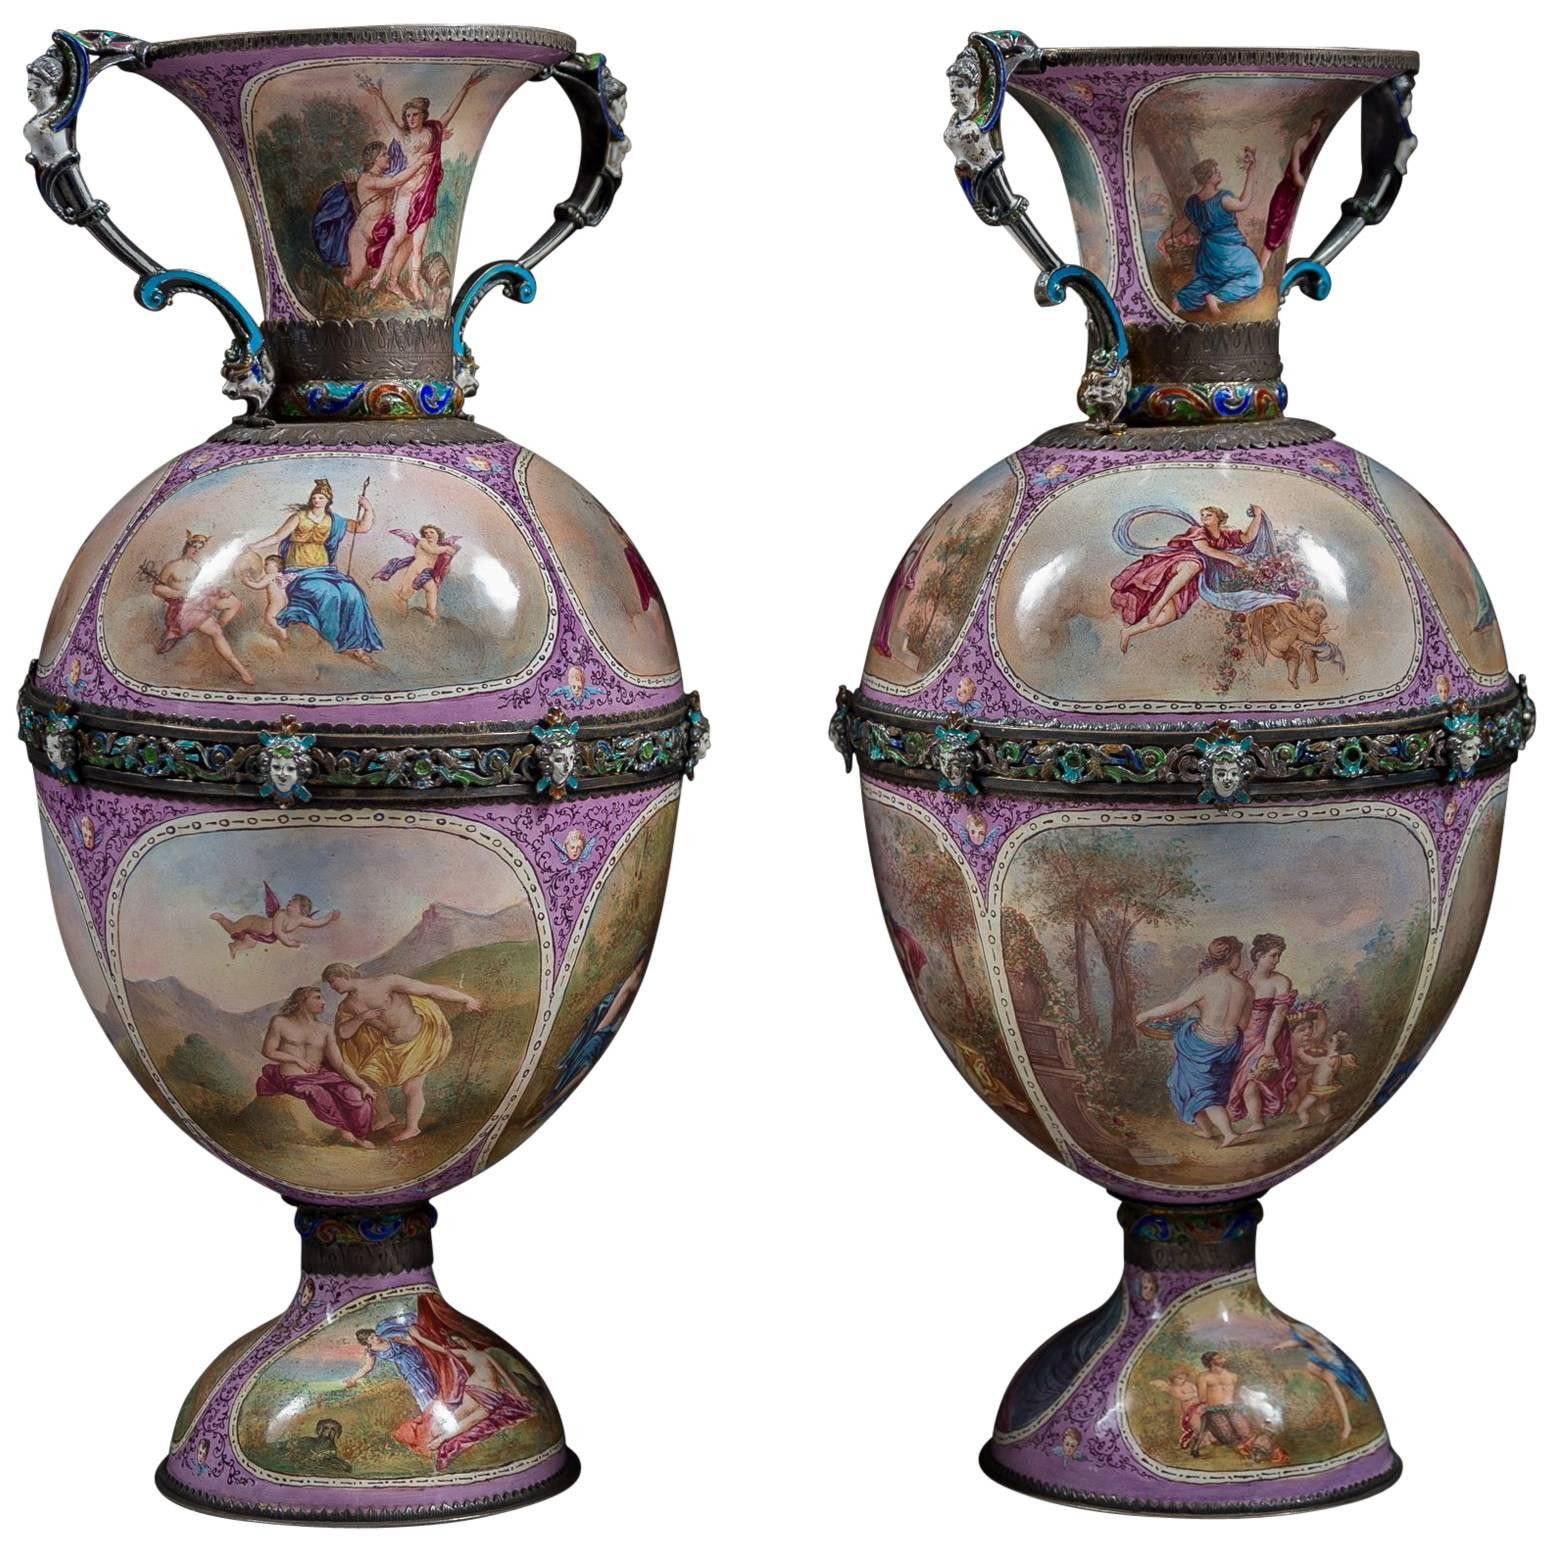 22 Recommended Antique Japanese Bronze Vase 2024 free download antique japanese bronze vase of a pair of large early 20th century japanese cloisionne enamel palace within a pair of large early 20th century japanese cloisionne enamel palace vases for sal